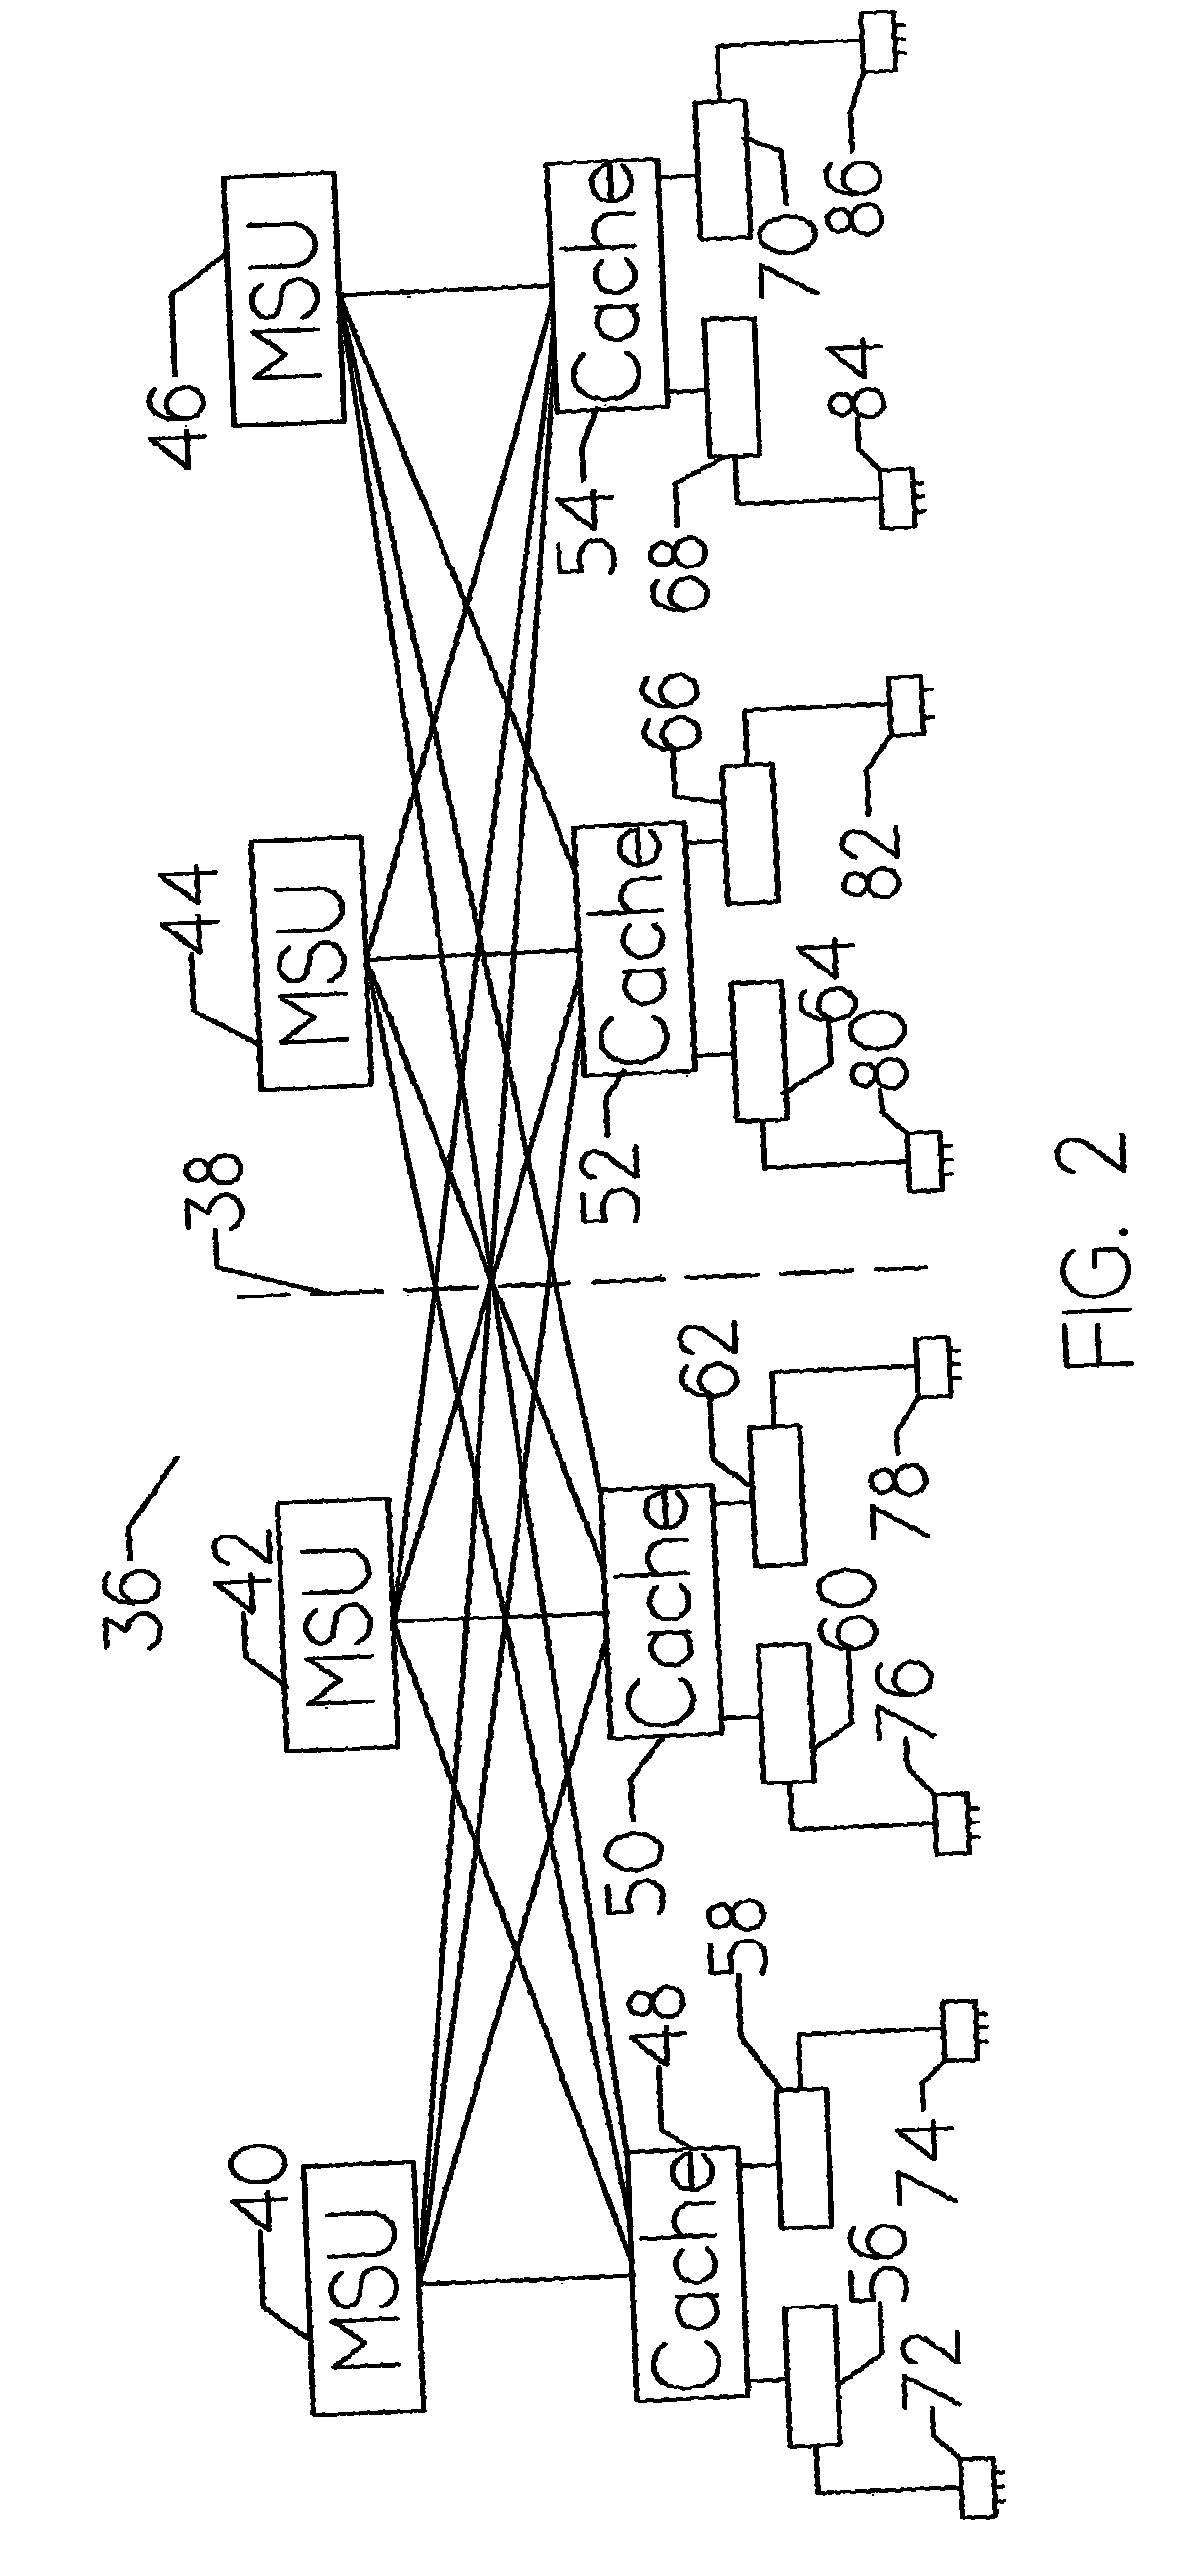 Method for obtaining higher throughput in a computer system utilizing a clustered systems manager